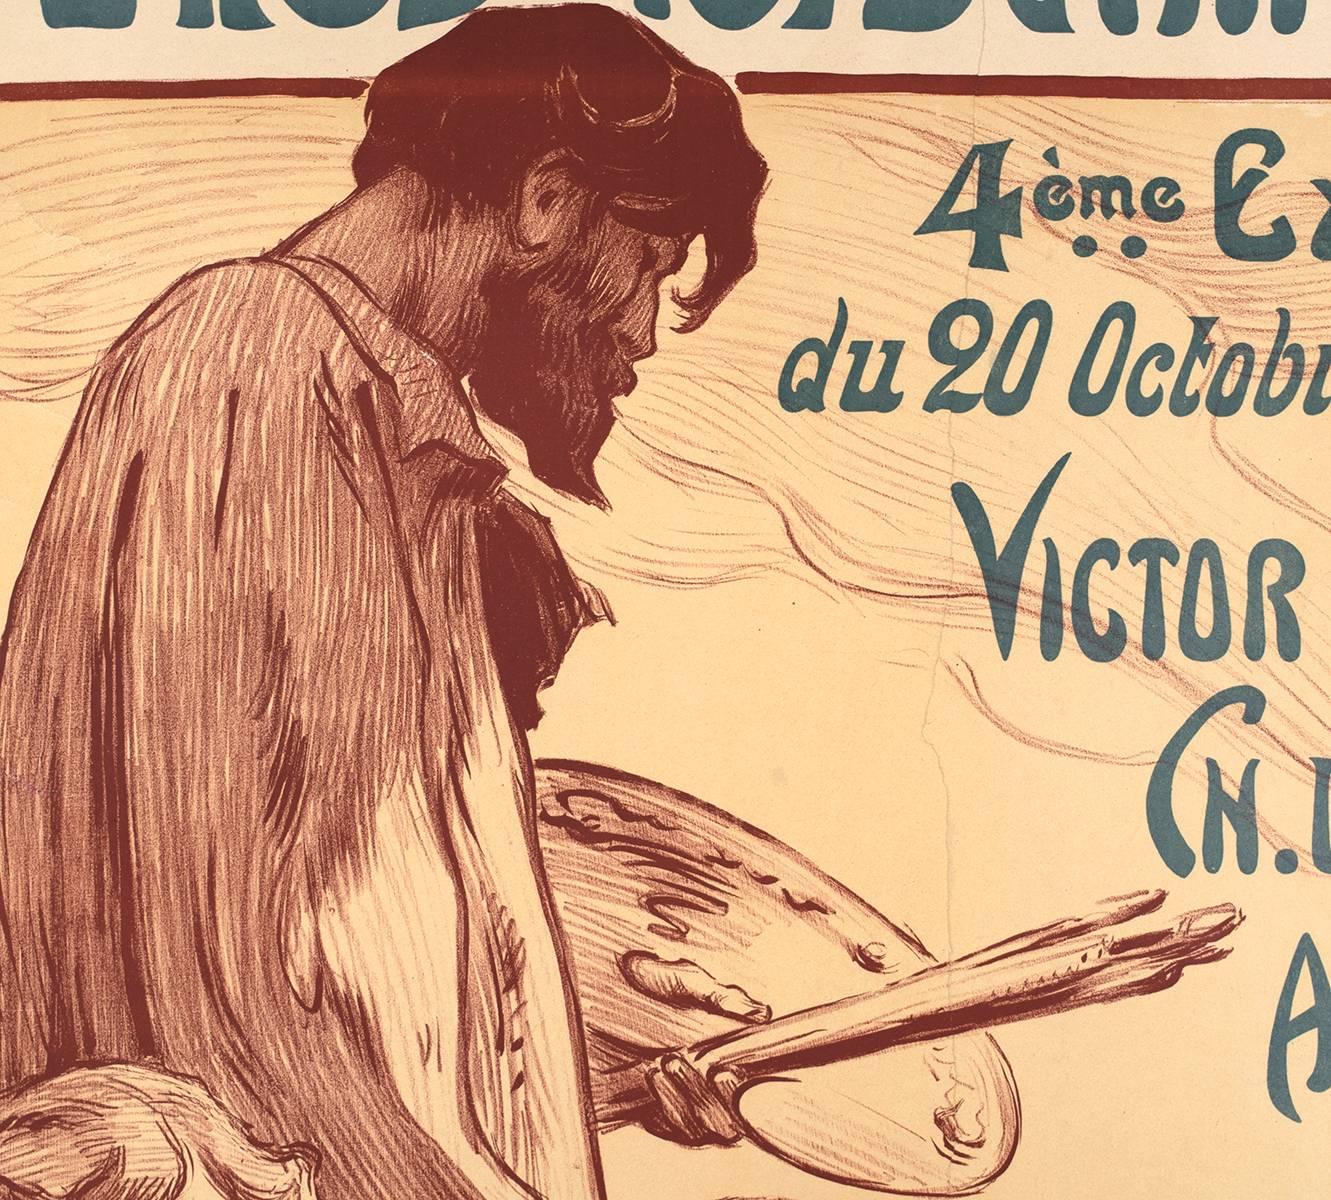 Original French Stone Lithograph Art Exhibition Poster by Victor Prouve, 1910 For Sale 2